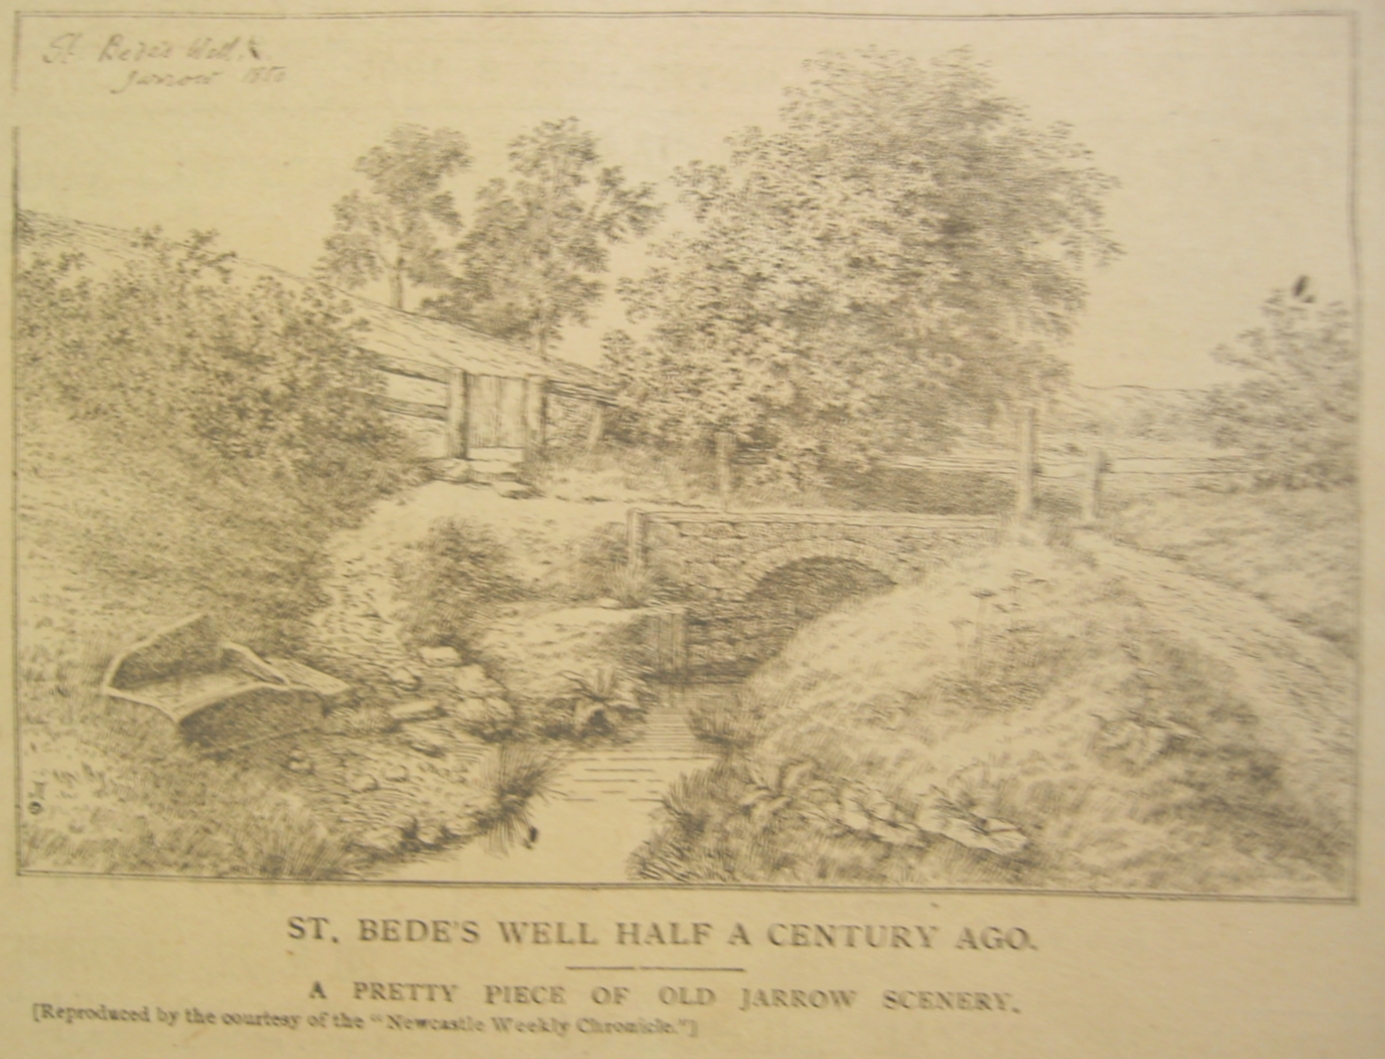 St. Bede's Well in 1858